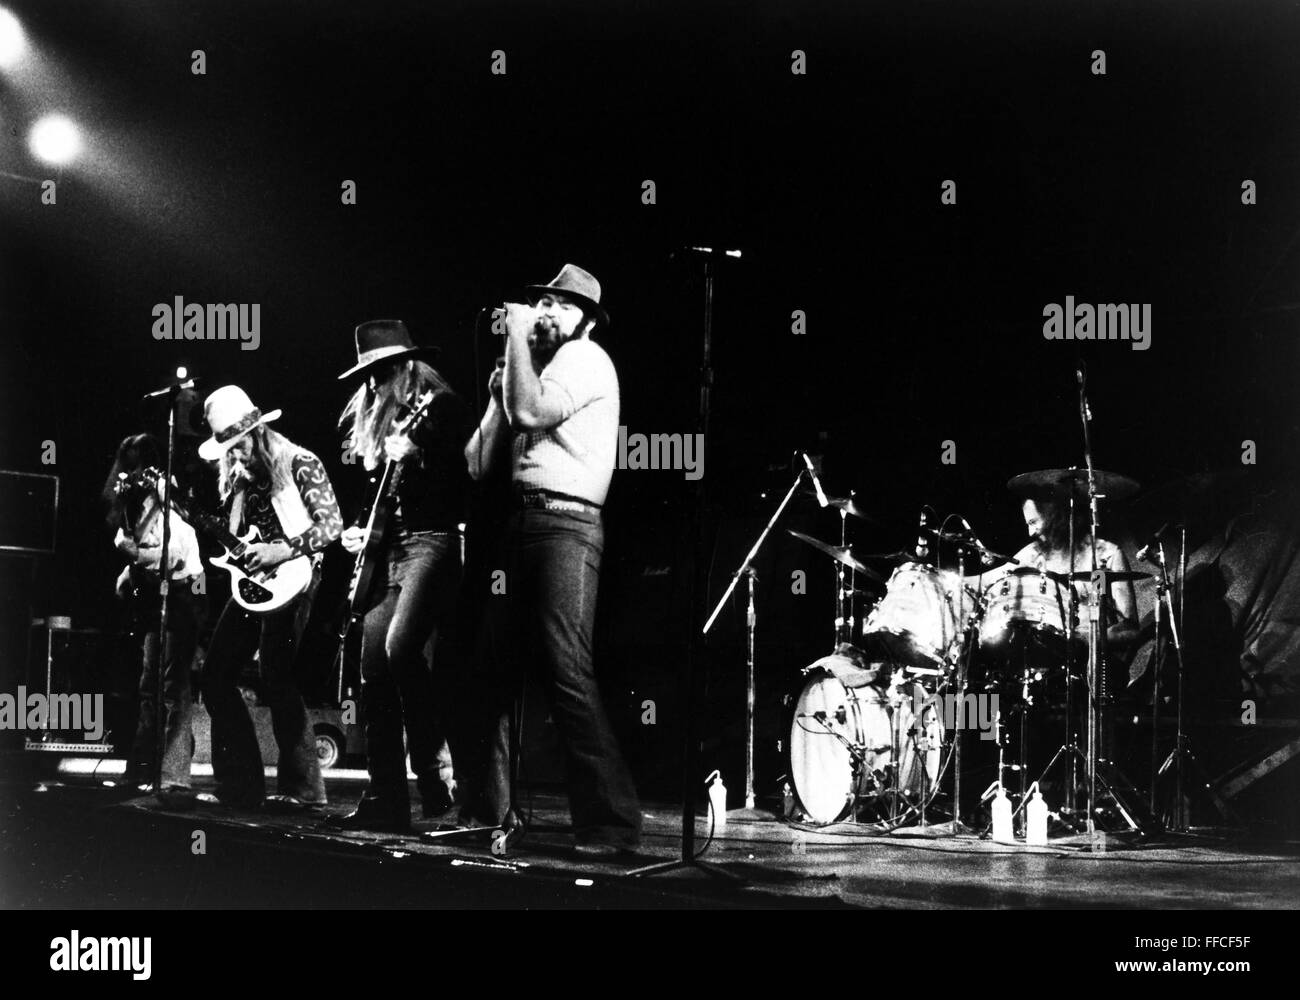 POINT BLANK, 1970s. /nAmerican rock and roll band. Photographed 1970s. Stock Photo